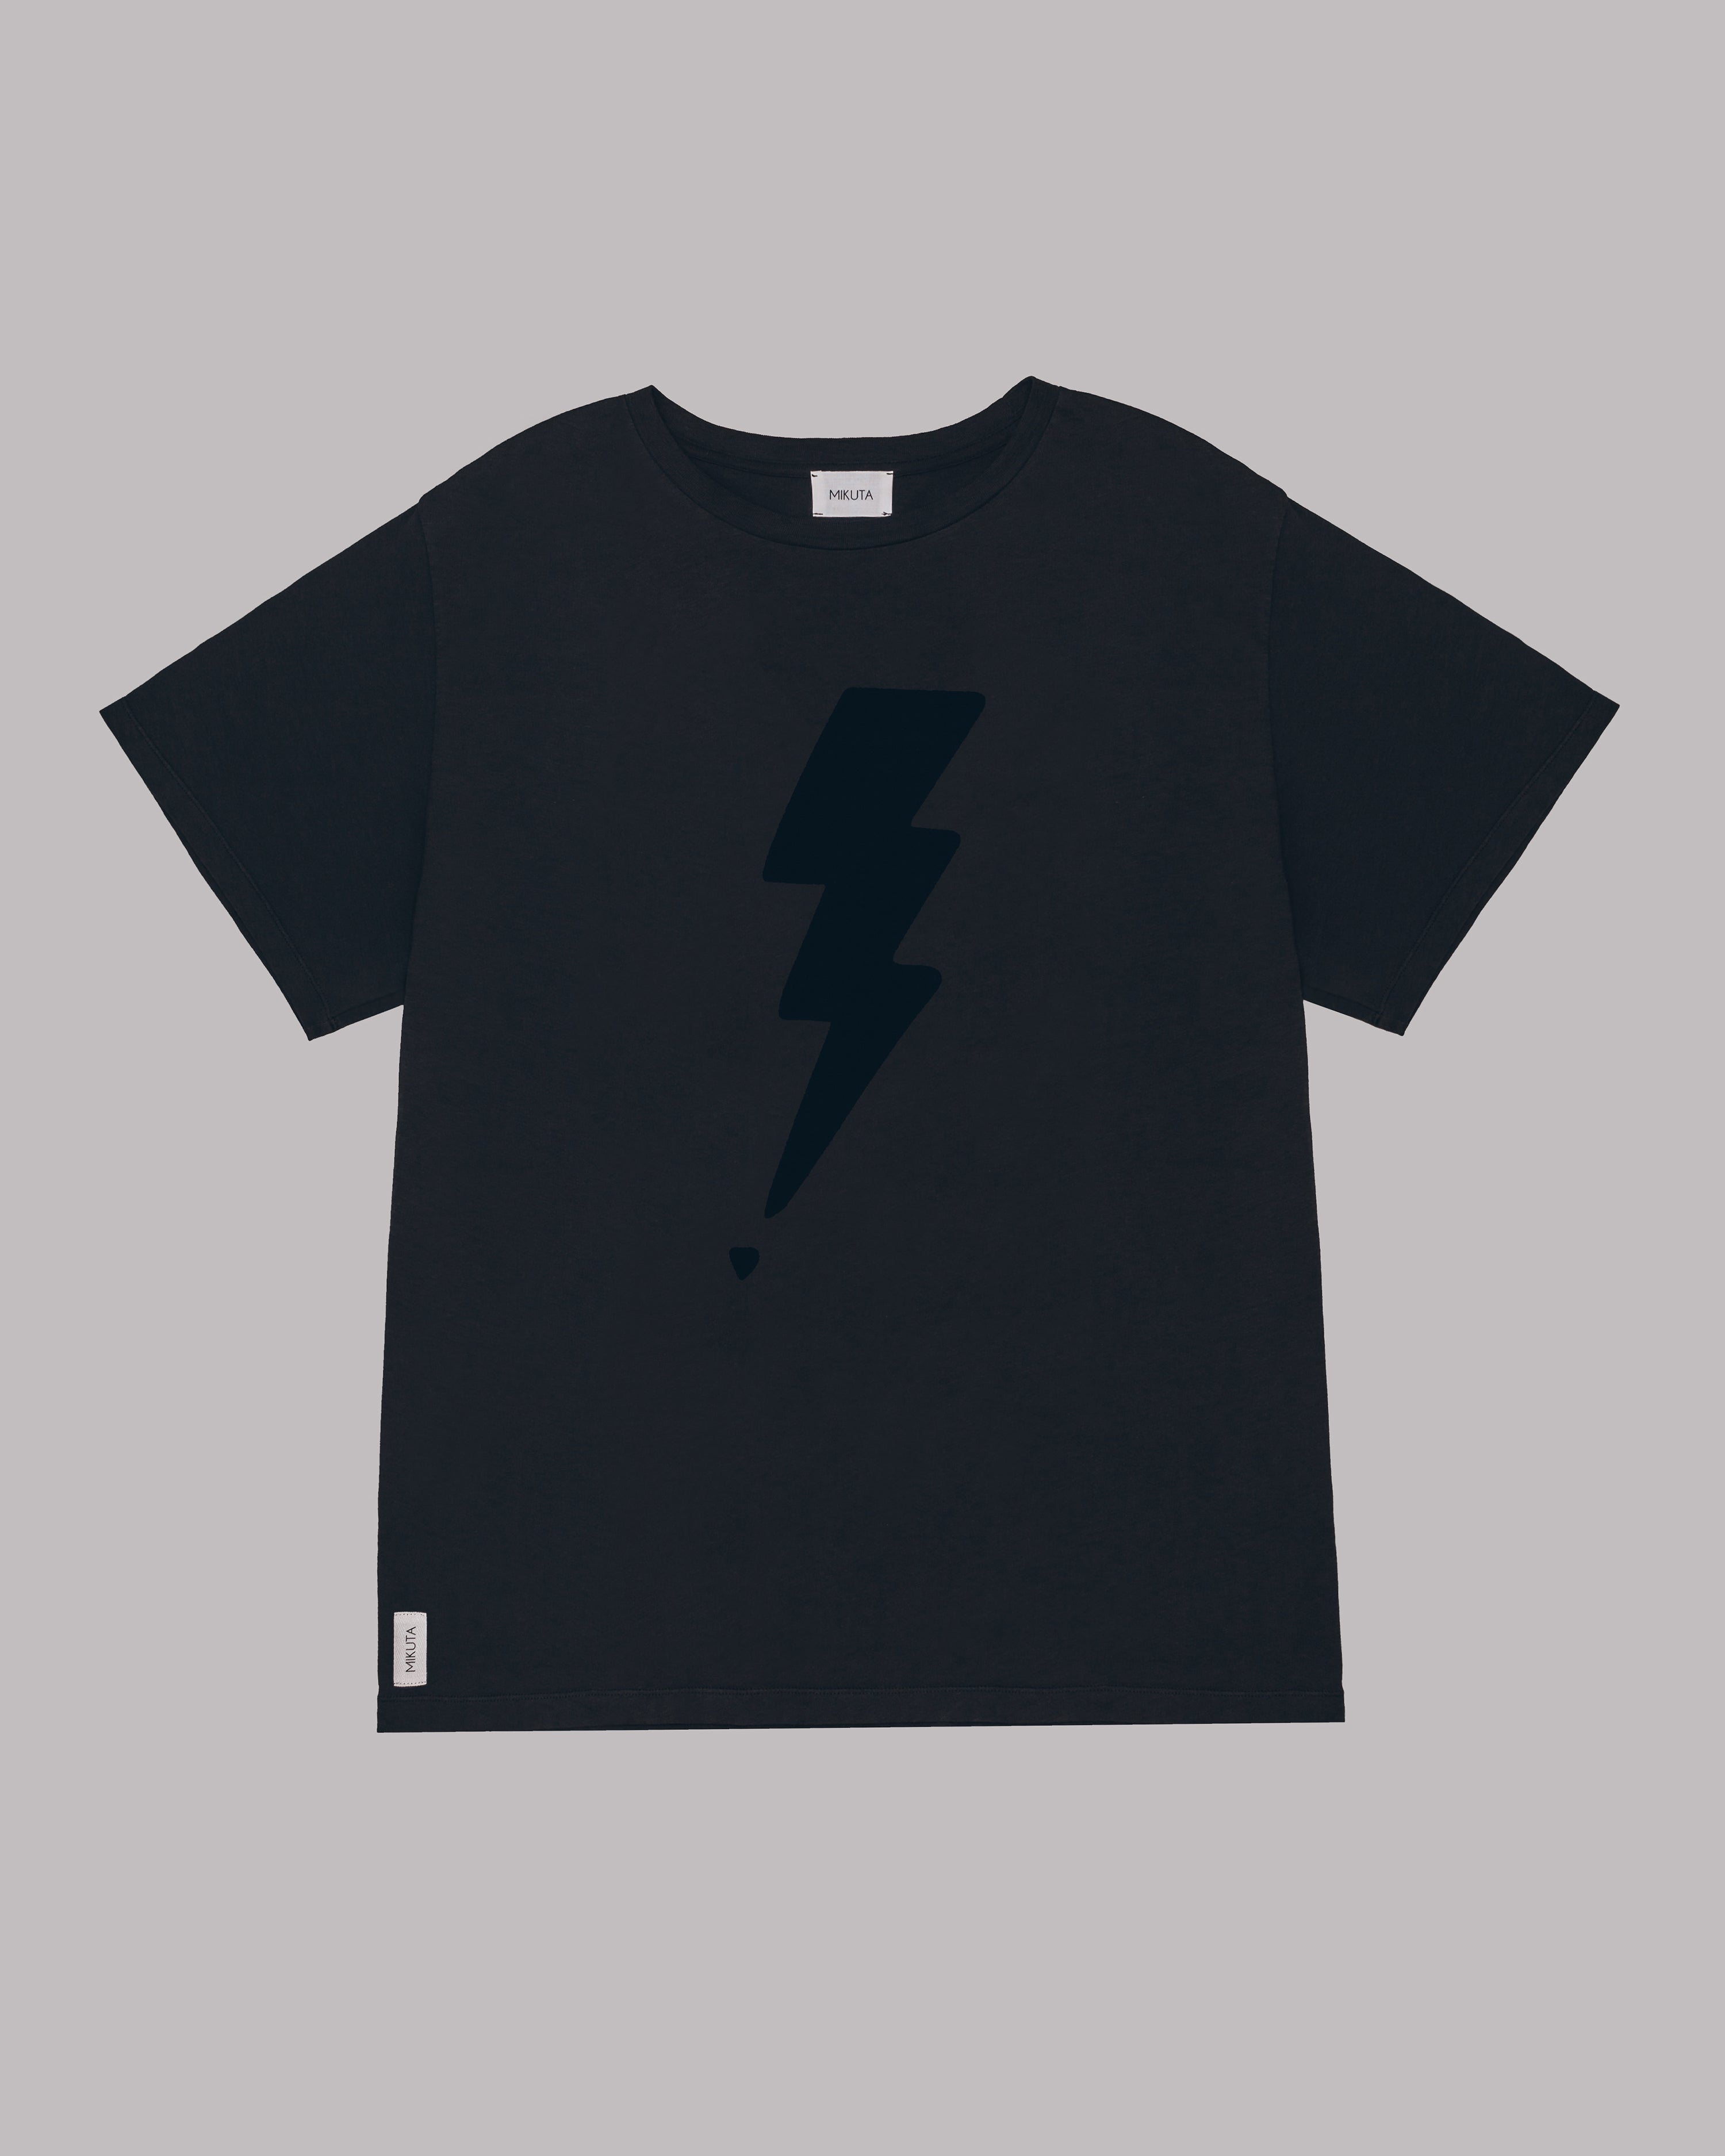 The Dark Flash Relaxed T-Shirt